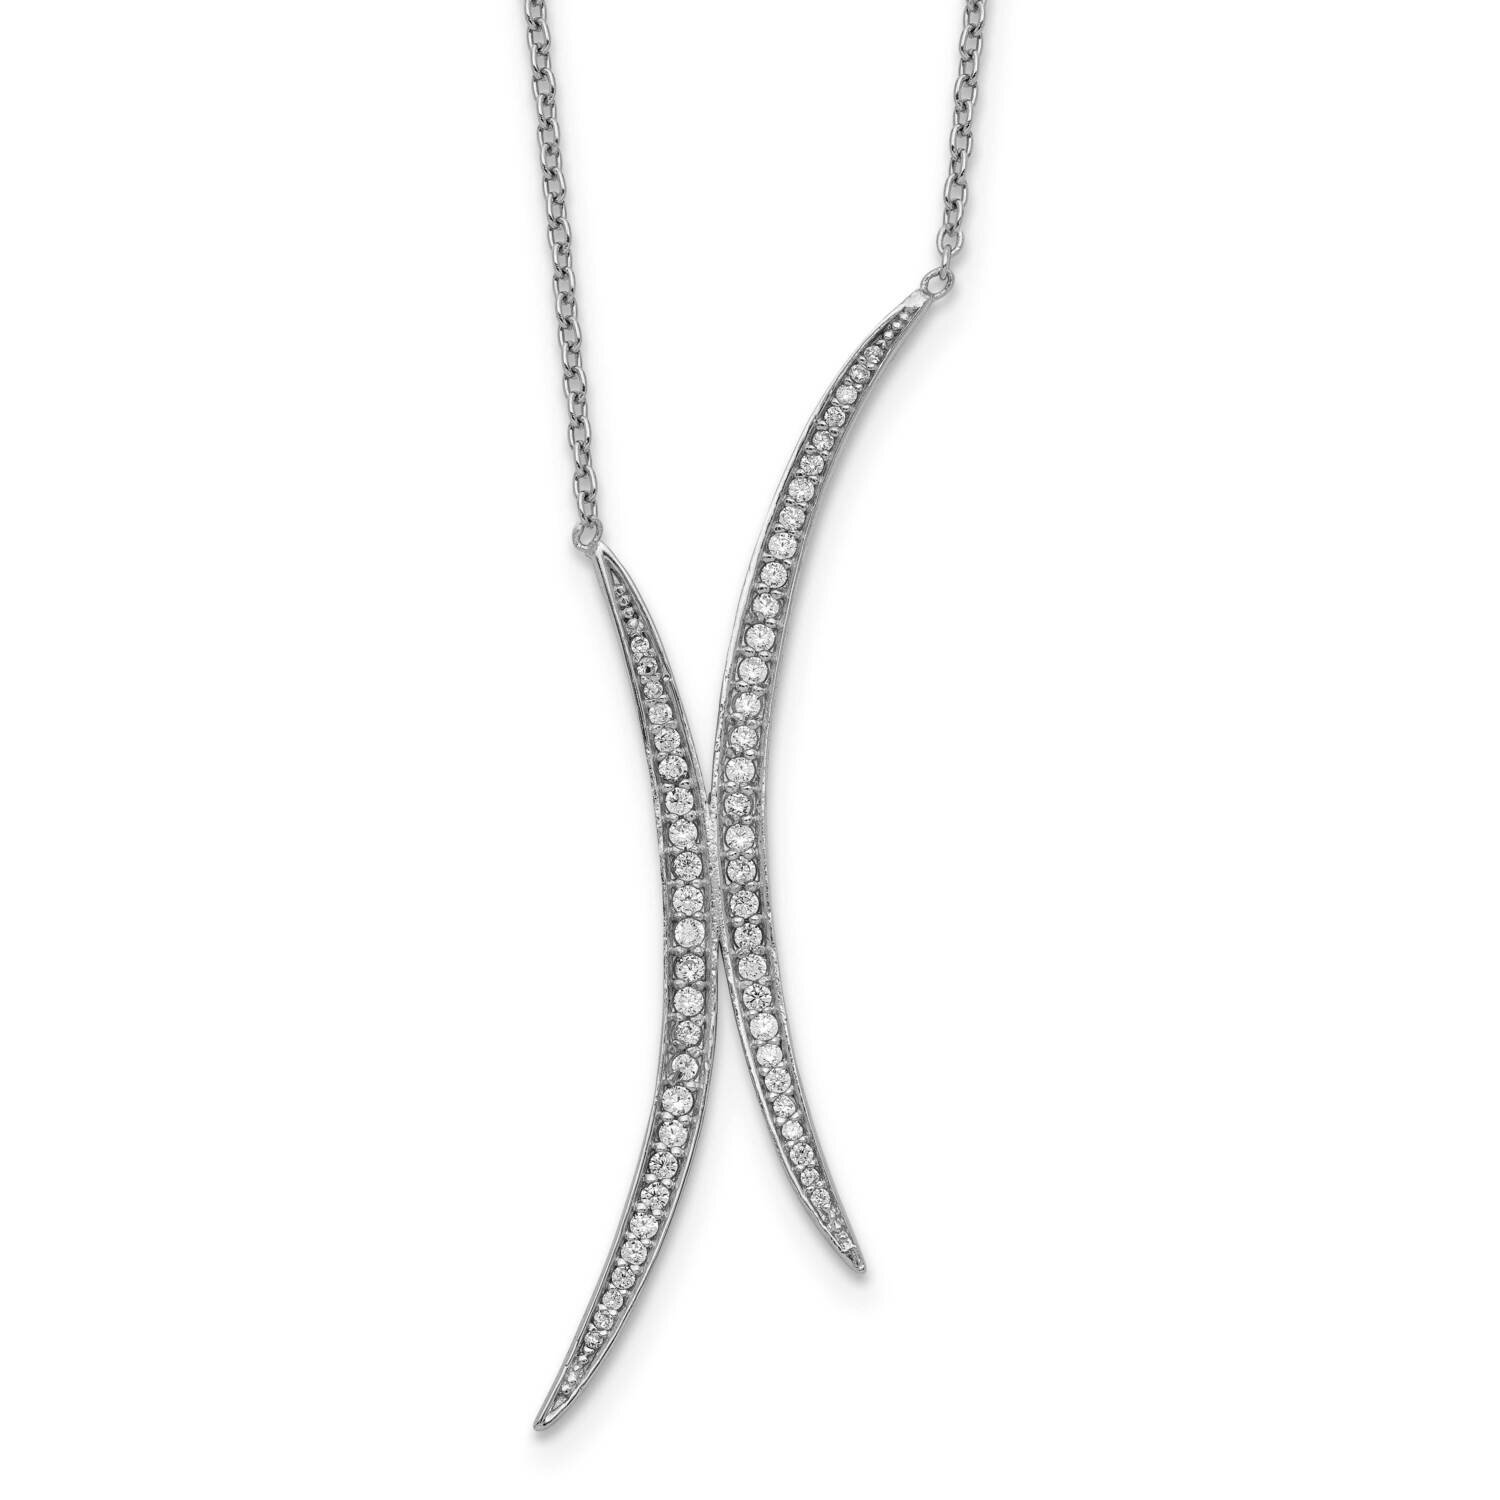 Curved CZ Diamond Necklace 24 Inch Sterling Silver Rhodium-Plated QG5423-24